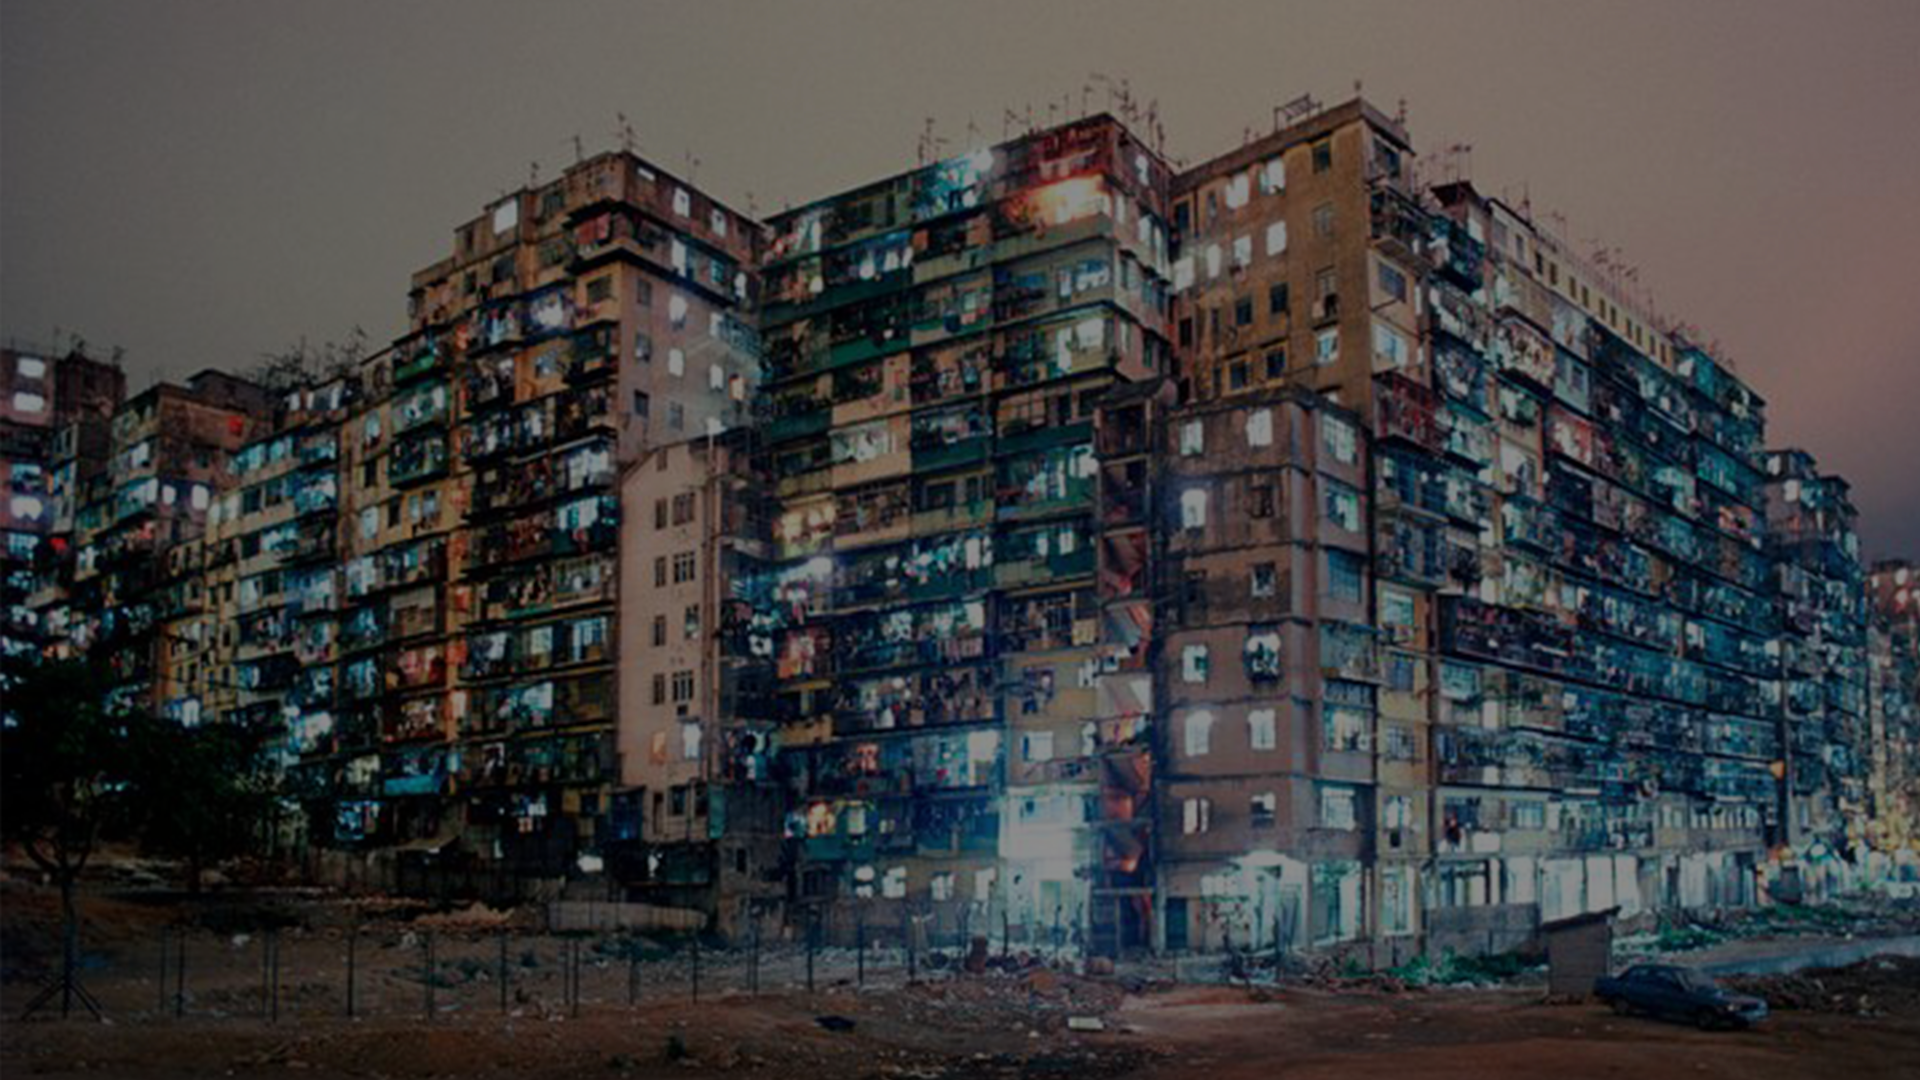 Discover The Fascinating History Of Kowloon Walled City: A Forgotten Urban Enigma